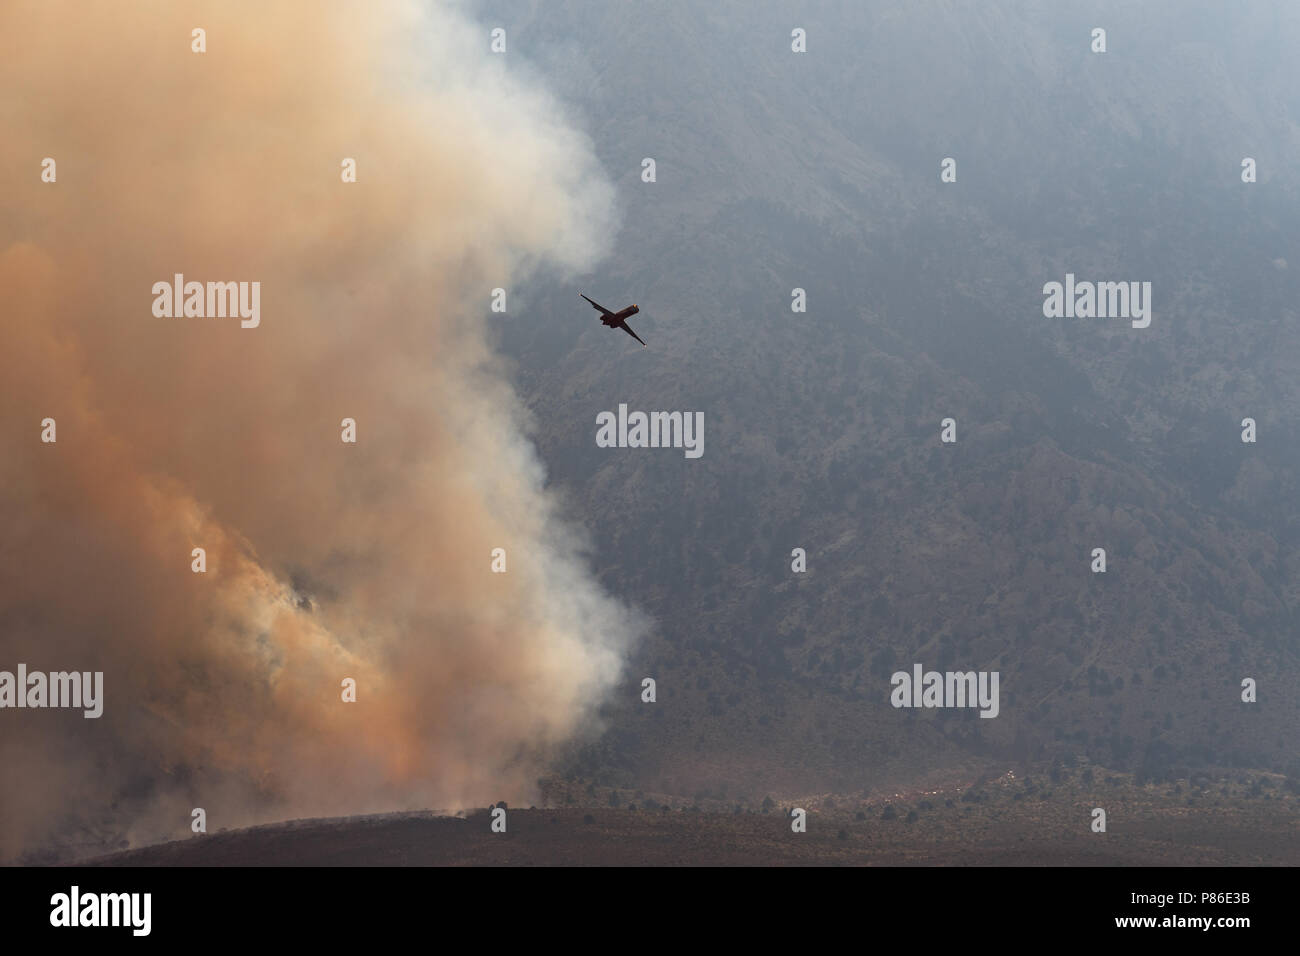 Alabama Hills, Lone Pine, CA. July 8, 2018. An air tanker after depositing fire retardant on the Georges Fire in the Alabama Hills west of Lone Pine, CA in eastern Sierra Nevadas.  The cause is under investigation. Lightning had been observed in the area. Fire crews from Inyo National Forest, the Bureau of Land Management (BLM),  CALFIRE, and local fire departments are fighting the fire with assistance from air tankers and helicopters. The helicopters are drawing water from the nearby California aquaduct. Credit: Ironstring/Alamy Live News Stock Photo